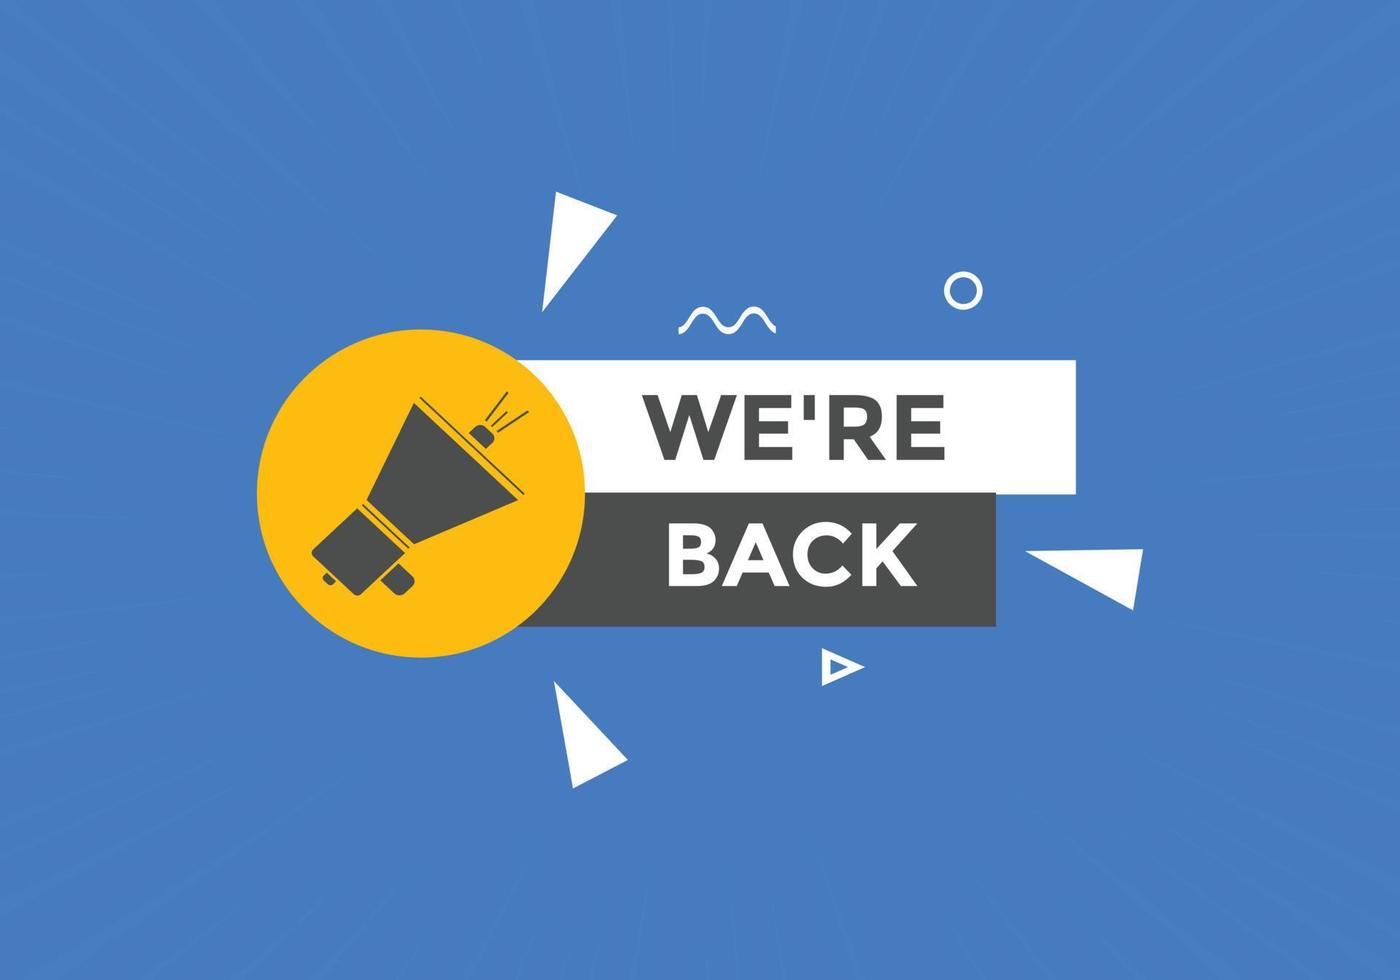 We are back button. speech bubble. We are back today web banner template. Vector Illustration.